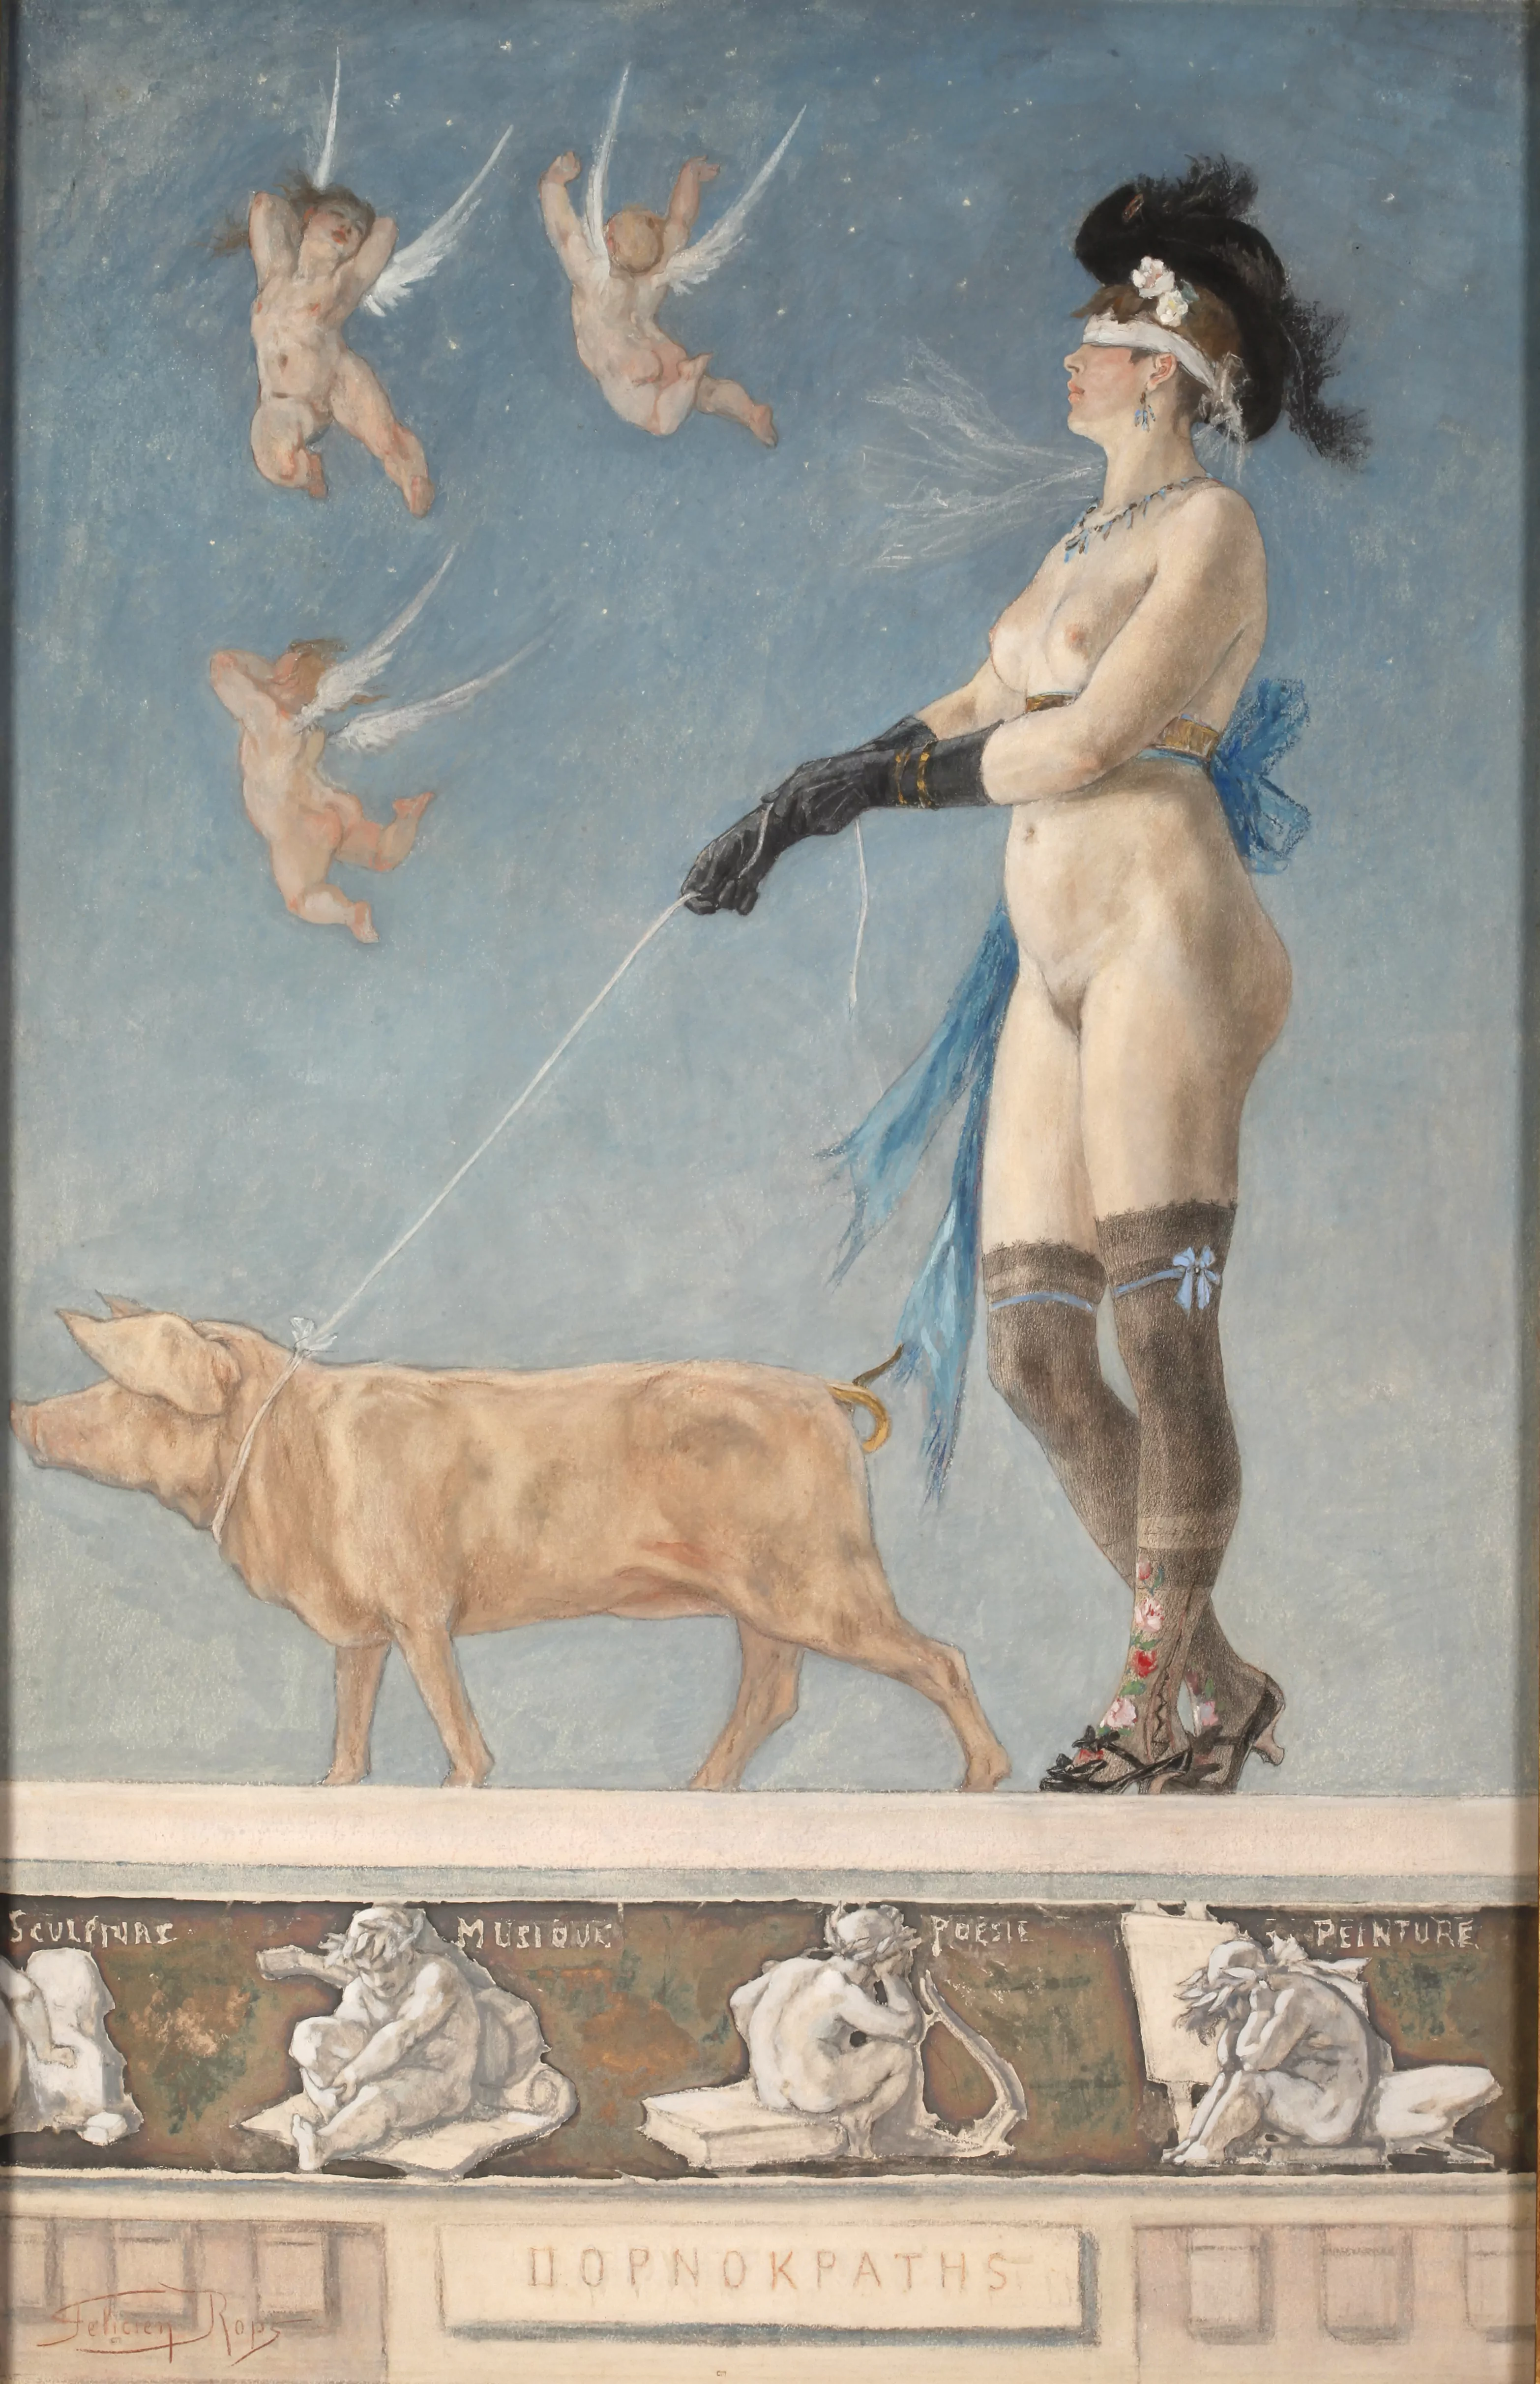 Pornocrates, The Lady with the Pig, Félicien Rops